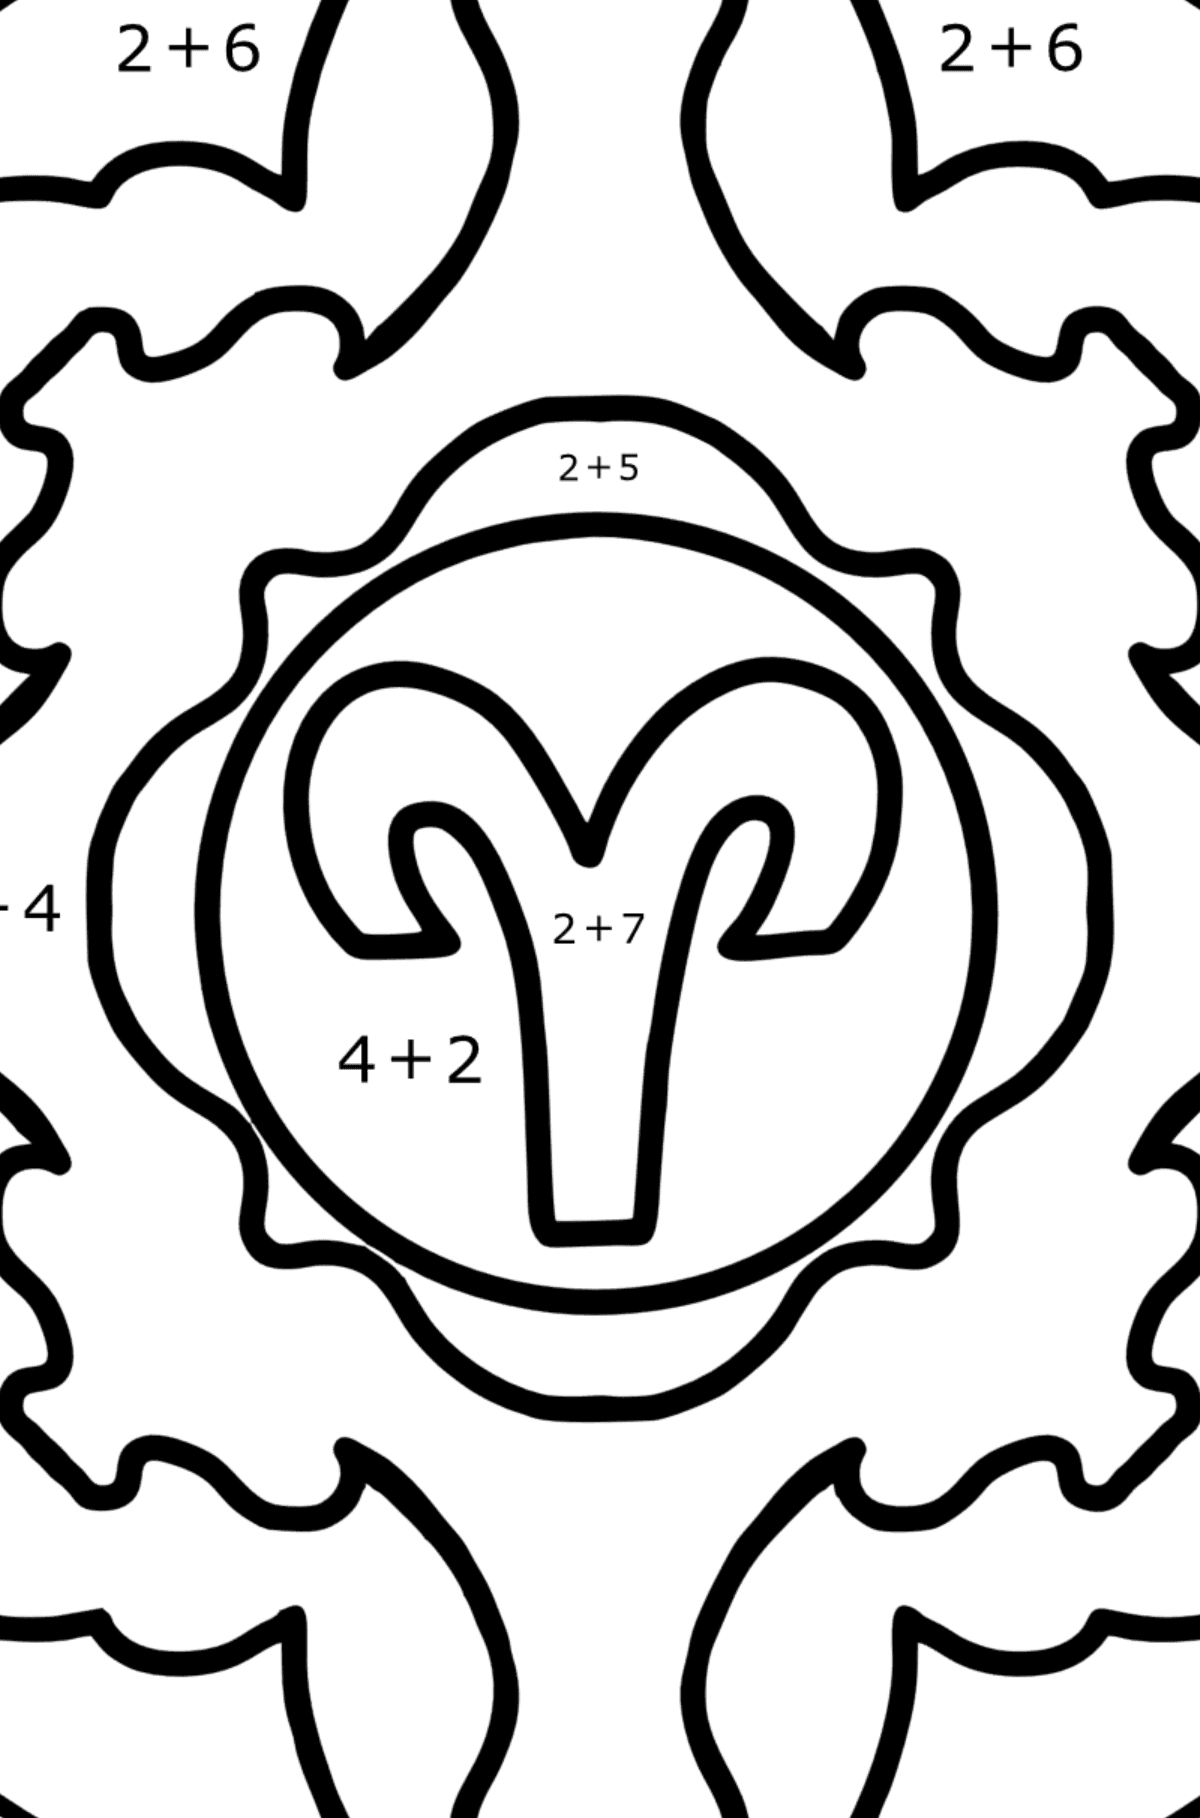 Coloring page - zodiac sign Aries - Math Coloring - Addition for Kids